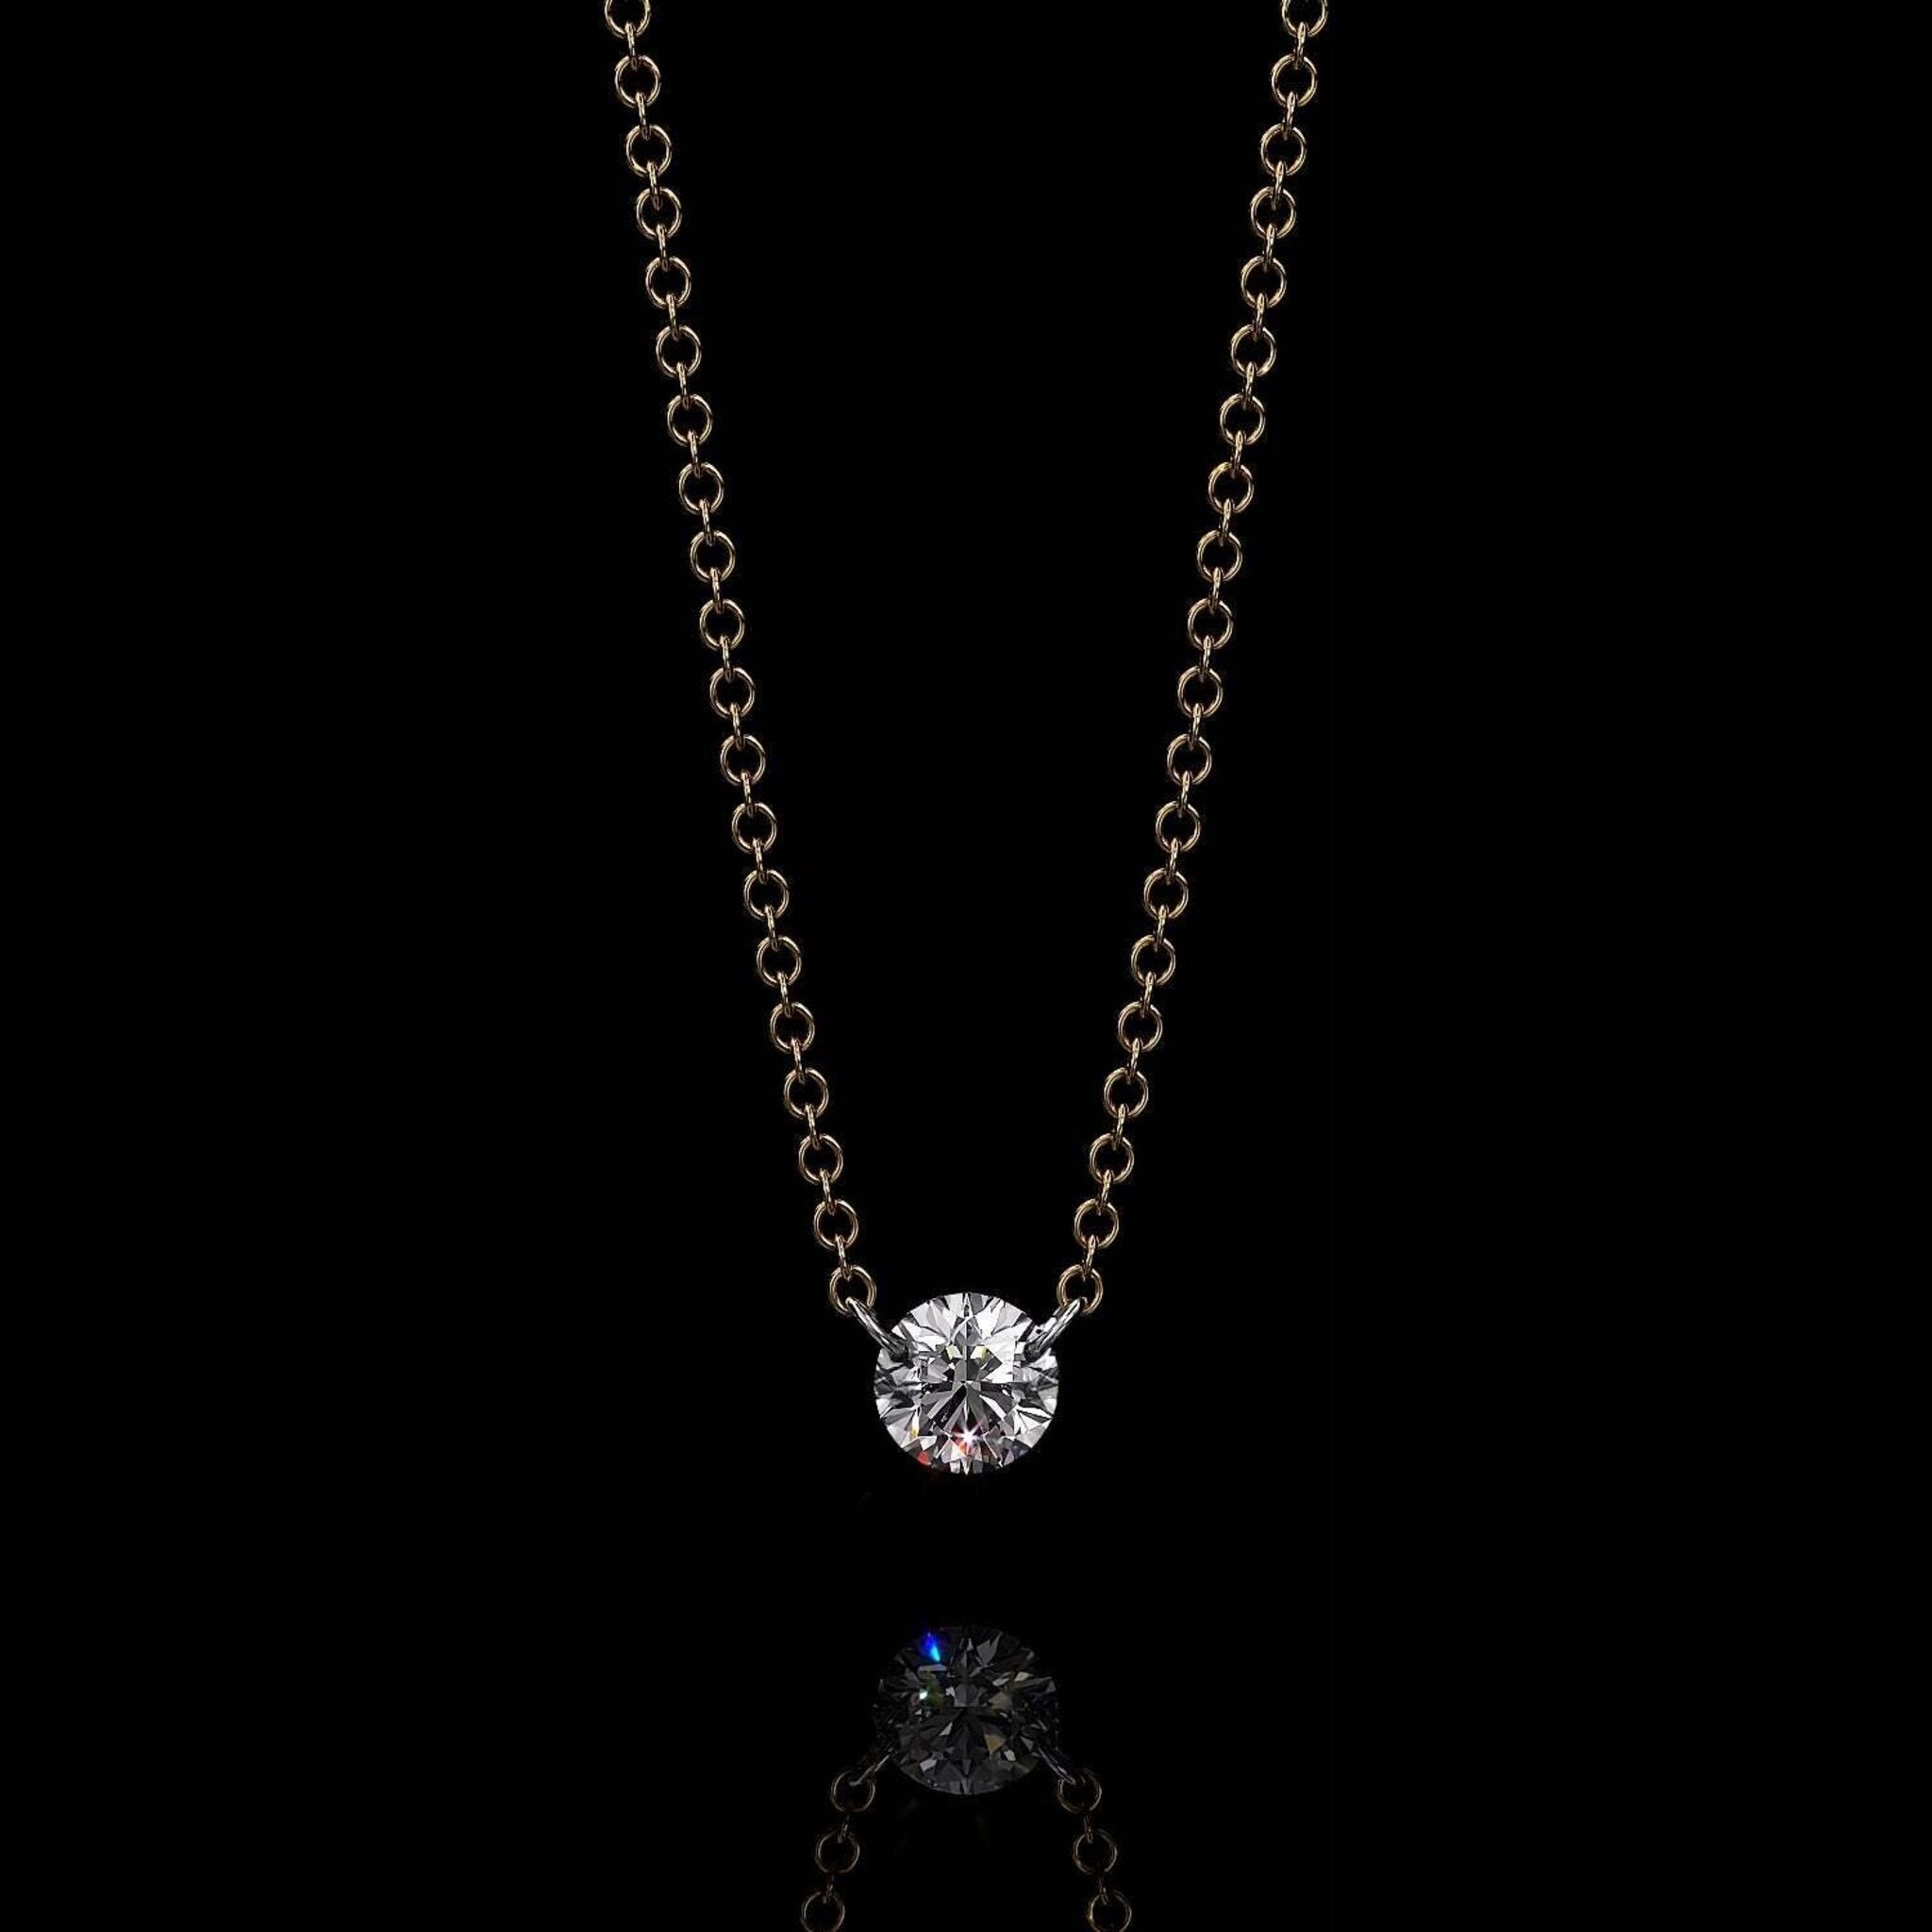 Aresa New York - Hadid Solitaire Necklaces - 18K Yellow Gold with 0.20 cts. of Diamonds